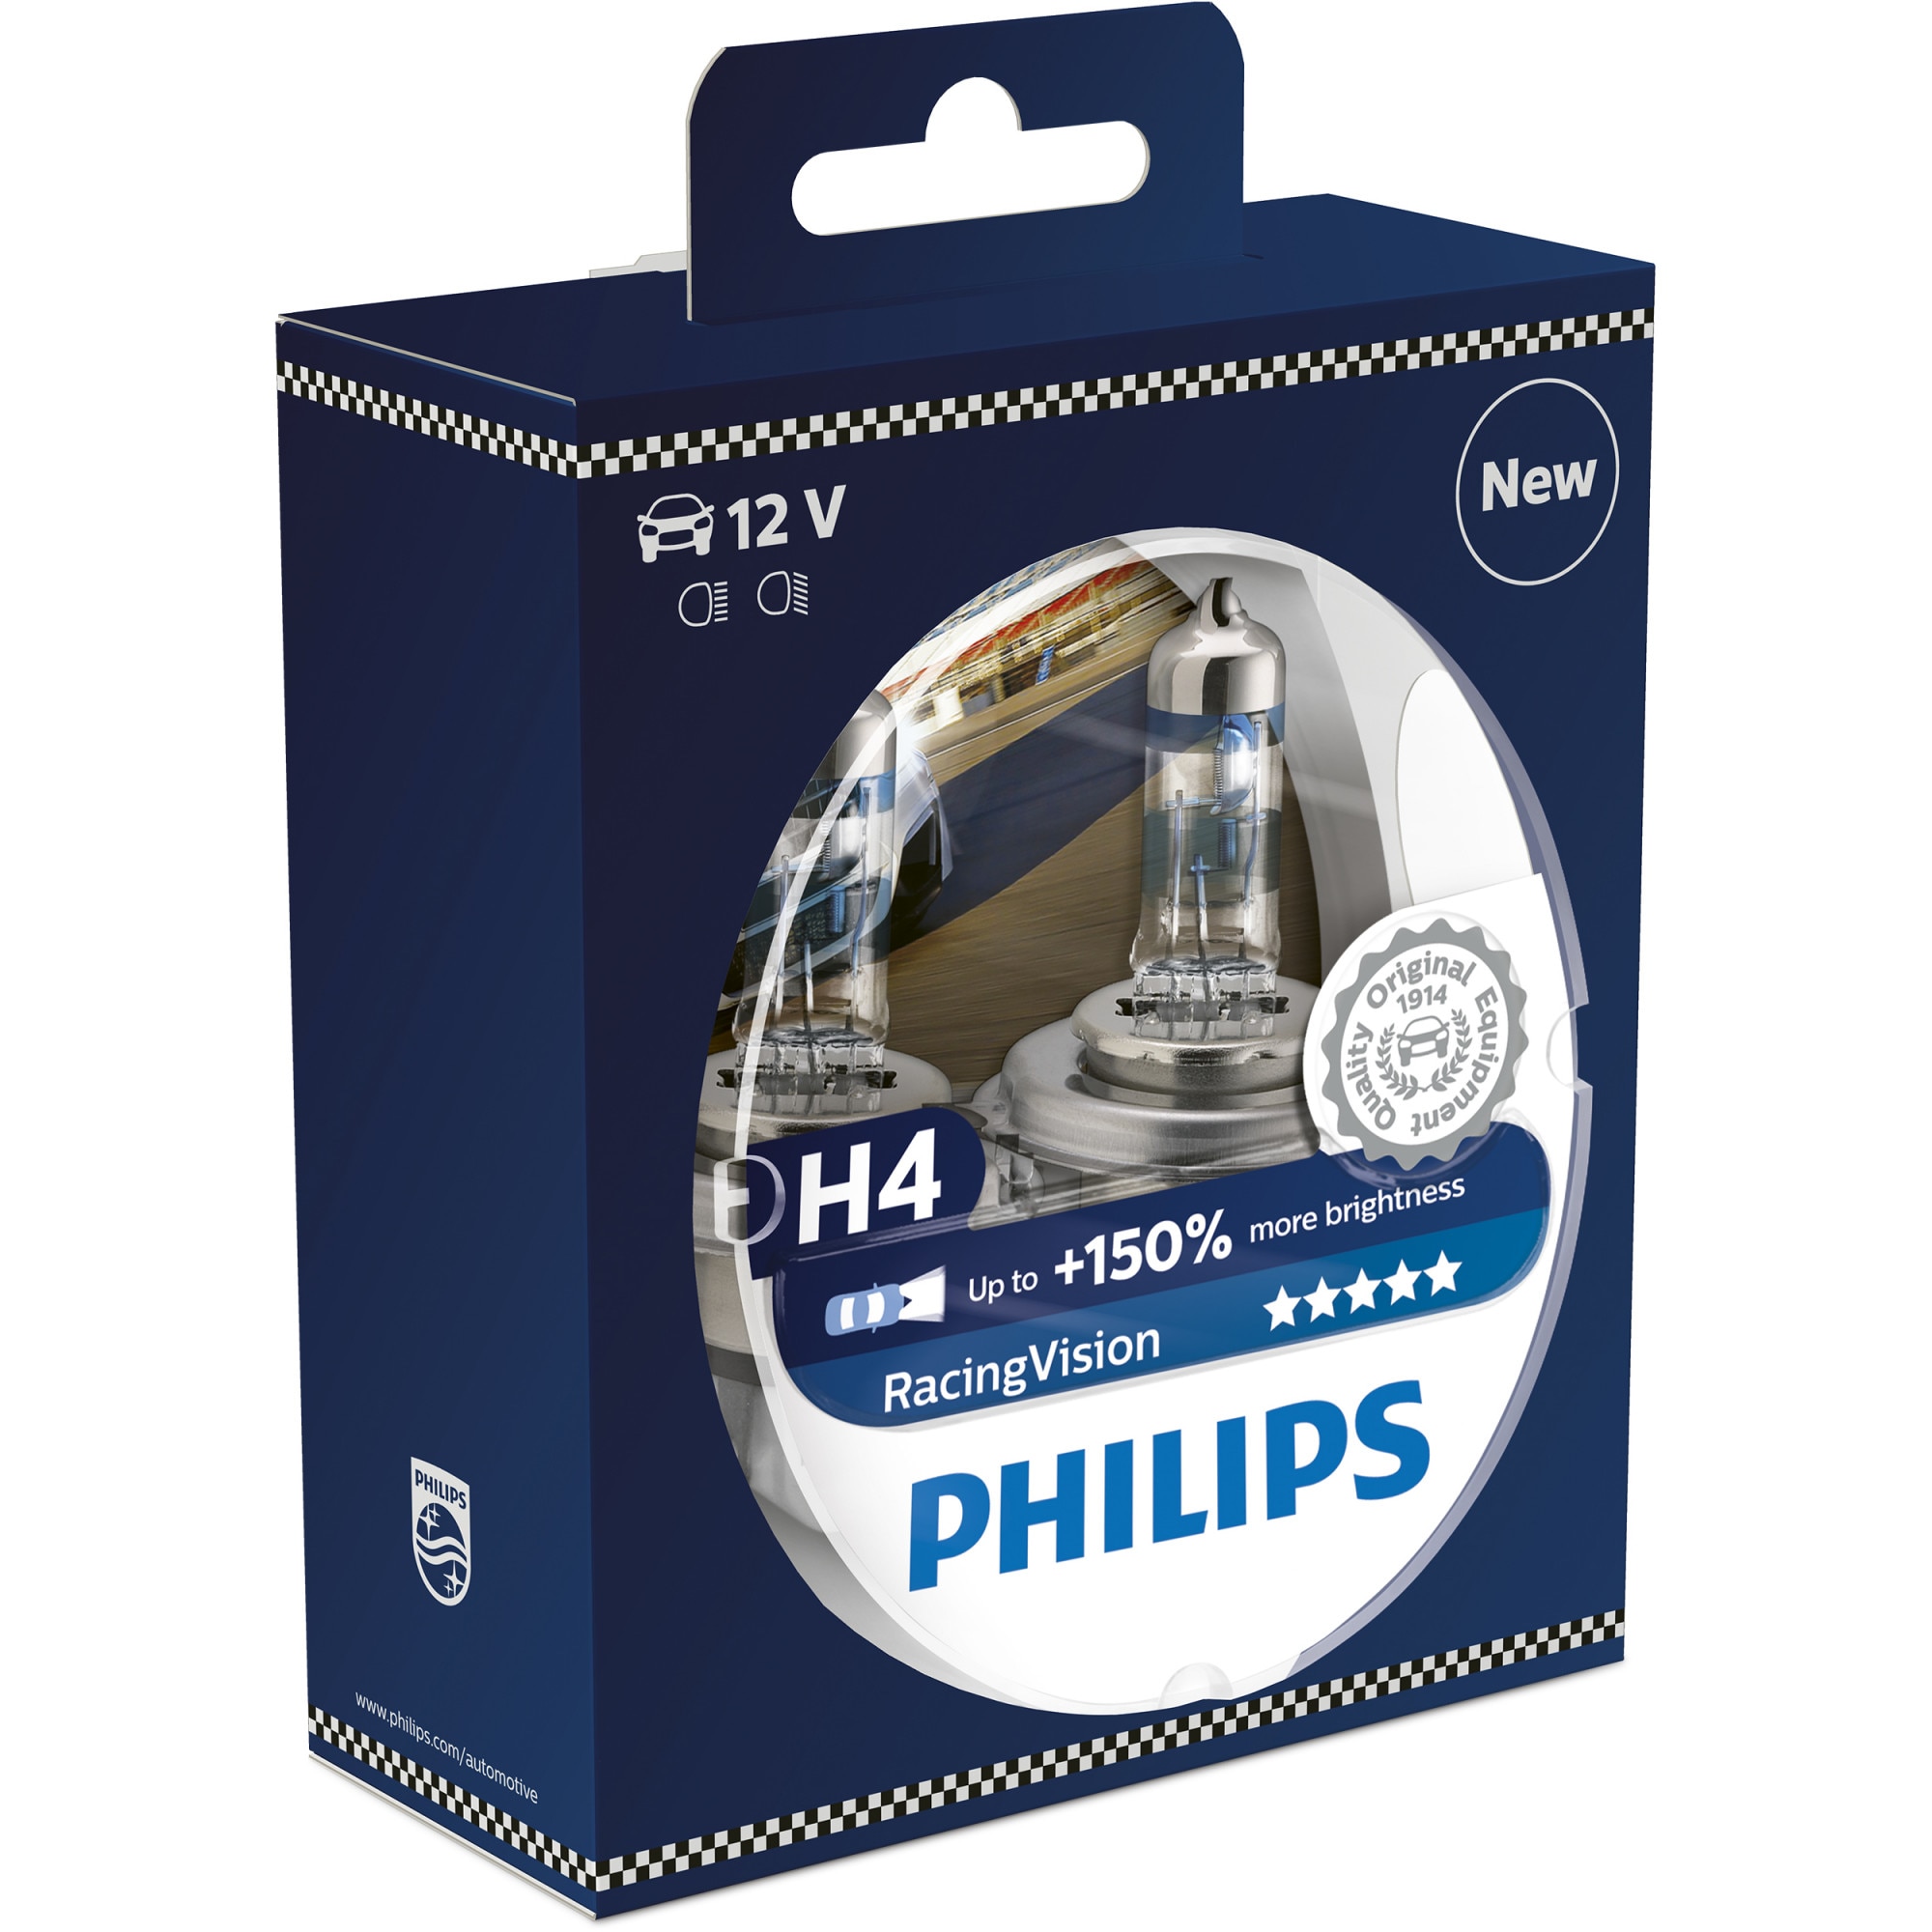 Philips 12v h4. 12972rvs2. Philips Racing Vision +150 h7. Philips Racing Vision +150% h4 (p43t) 12v 60/55w. Галогенная лампа Philips h4 +150.